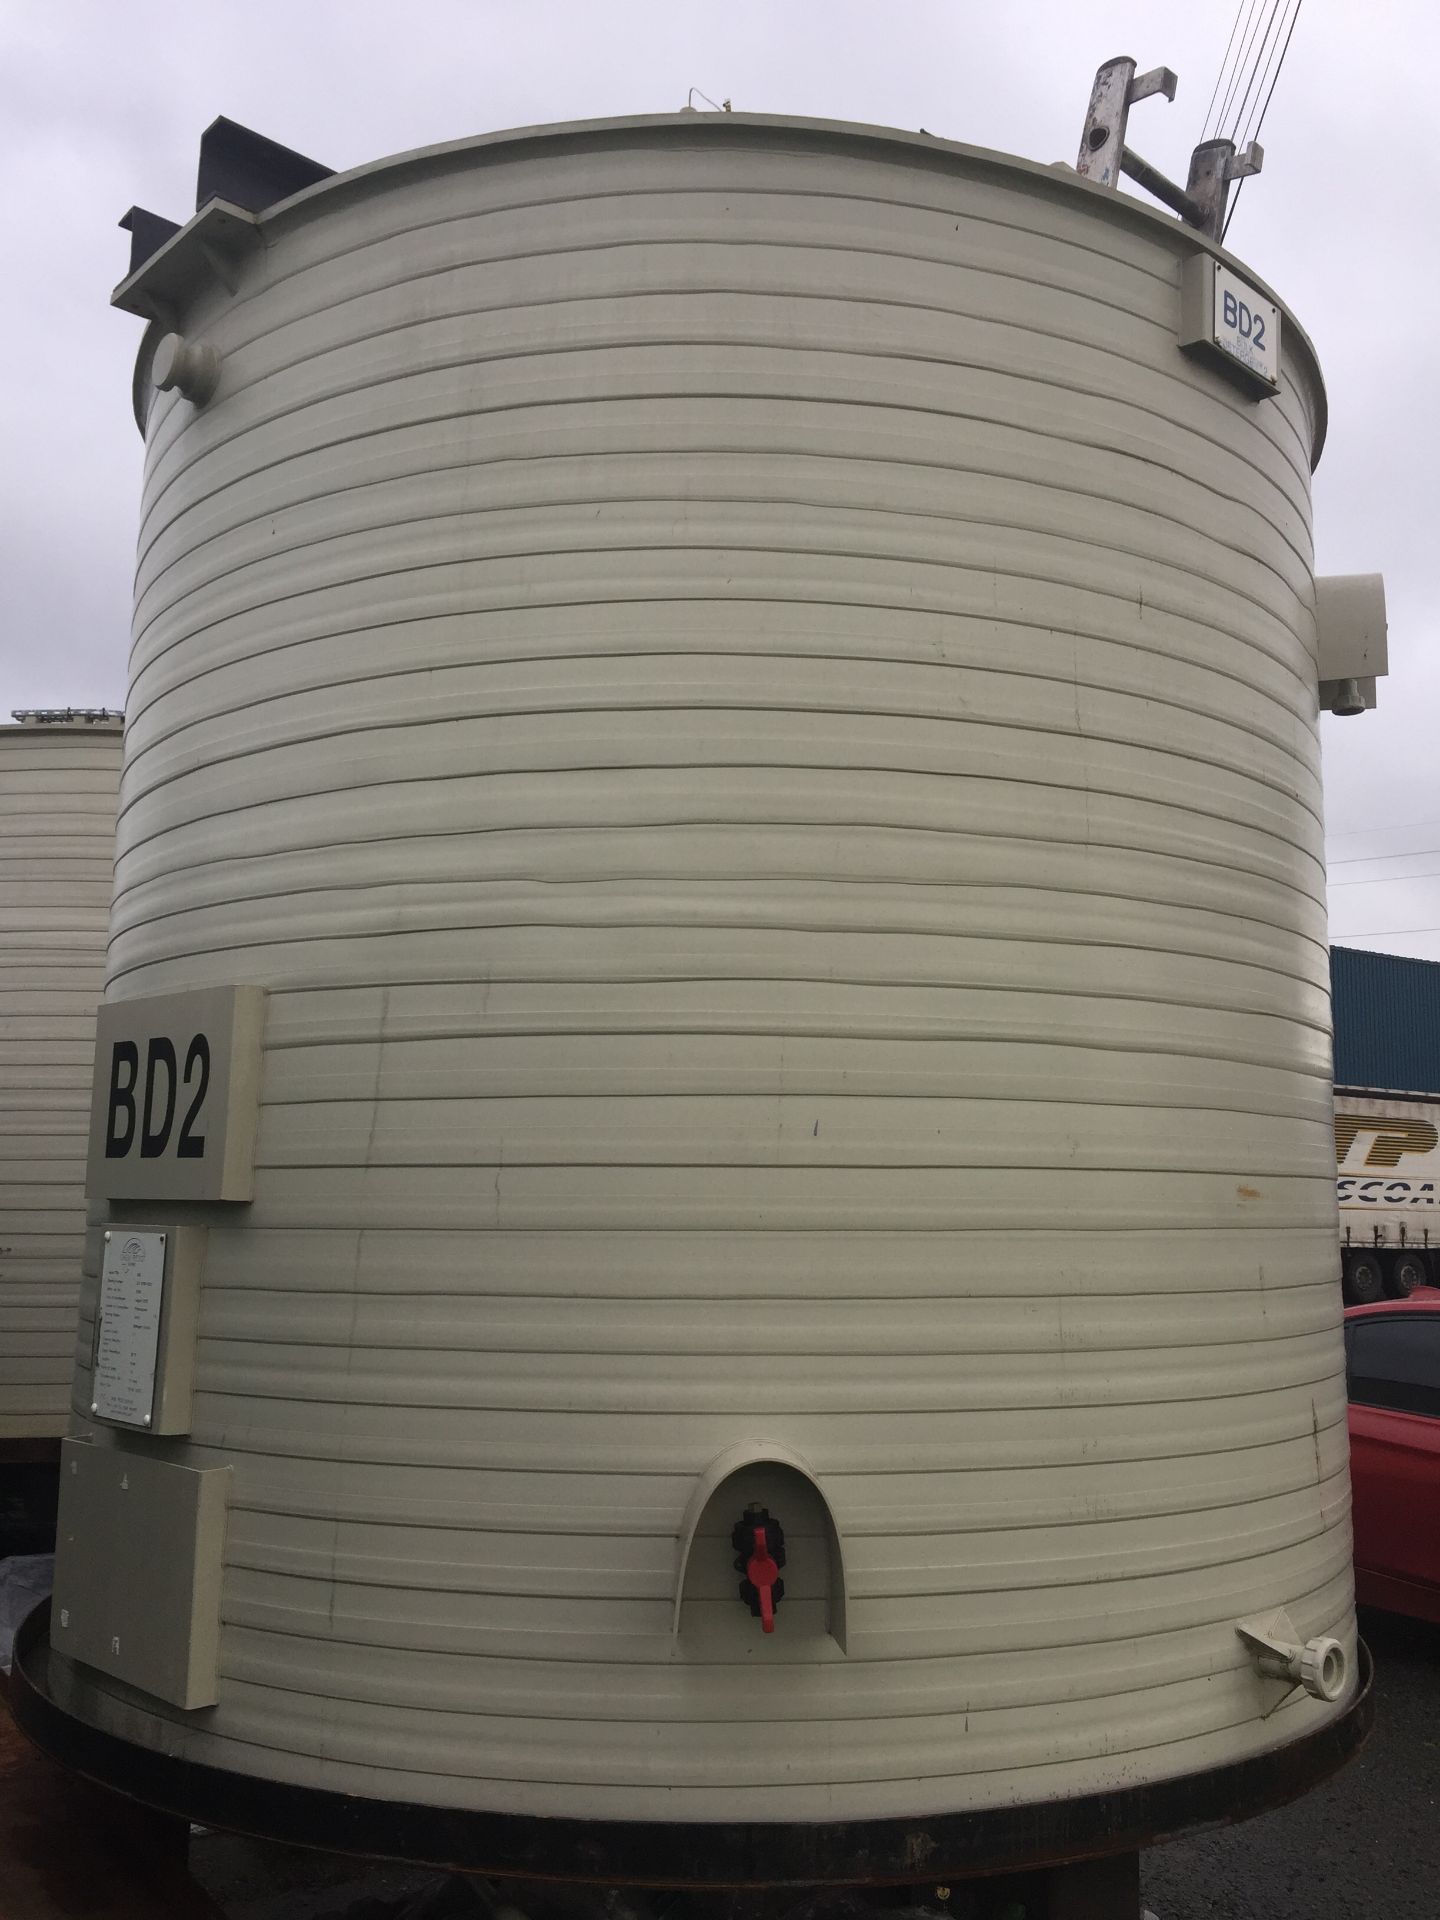 1 x BD2 12,000 Litre Polypropelene Chem Resist Tank - Location: Oldham Has been used for holding